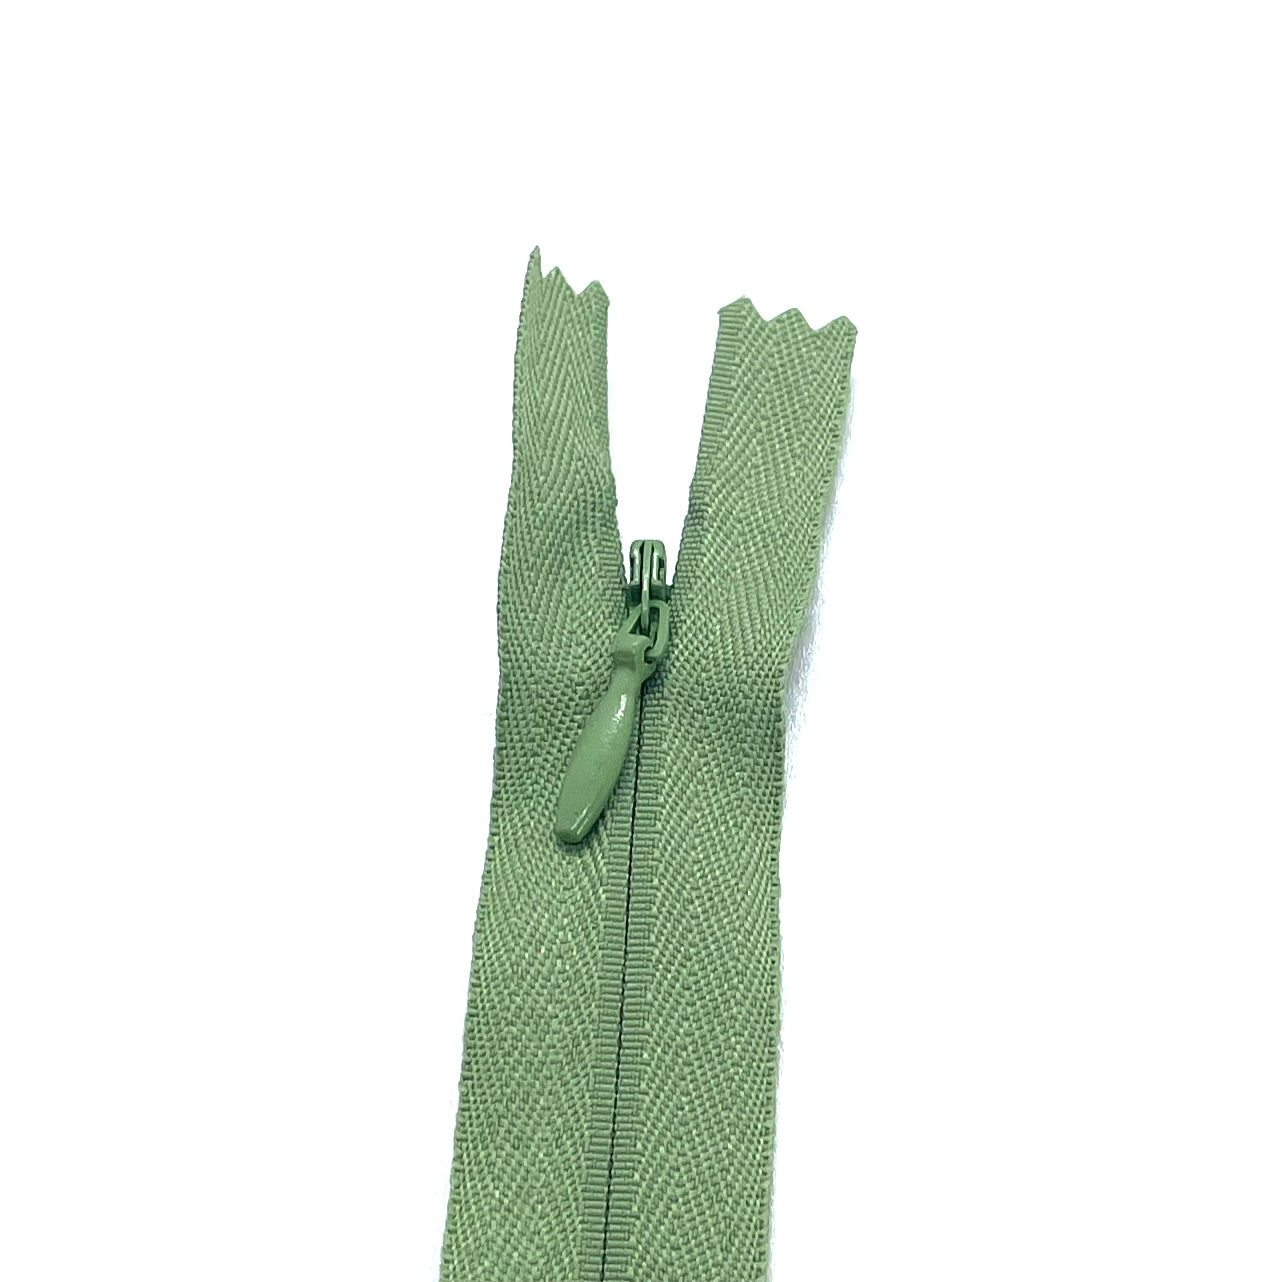 Photo of dusky sage green invisible or concealed zips available in many different colours and sizes. Great for achieving a professional finish in your products. Invisible zippers are perfect for dressmaking, cushions, crafts, etc., where you don't want your zipper showing. Installing them can be tricky without the right foot on your machine; a normal zipper foot is for installing standard zippers, while you will need an invisible zipper foot for a professional result